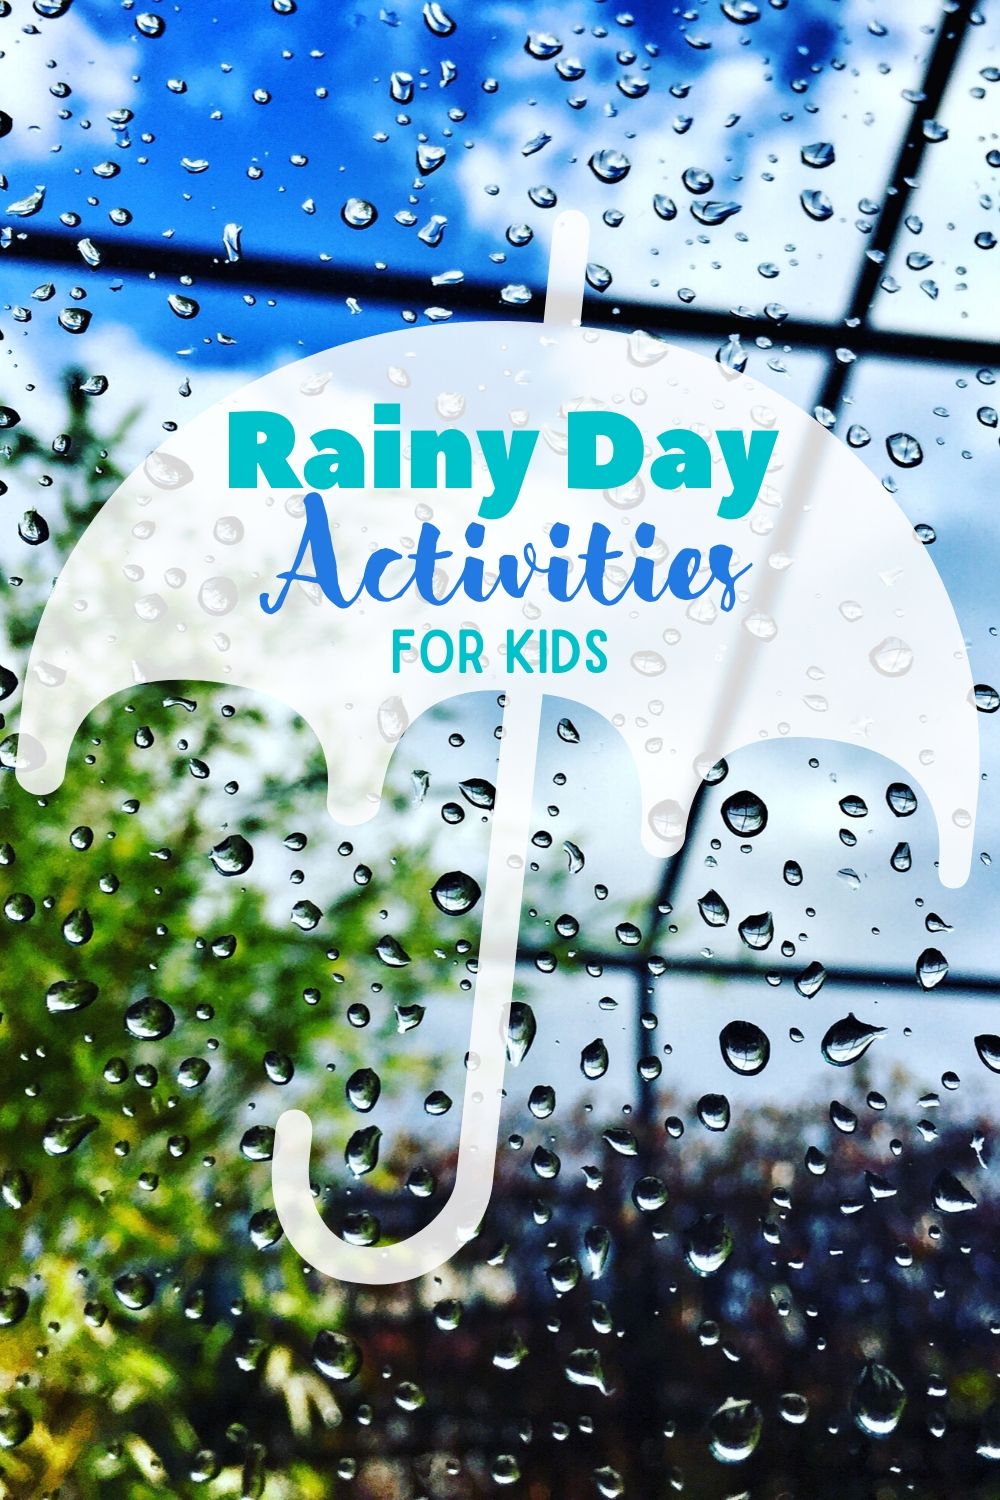 rainy day activities and other fun things to do in the rain